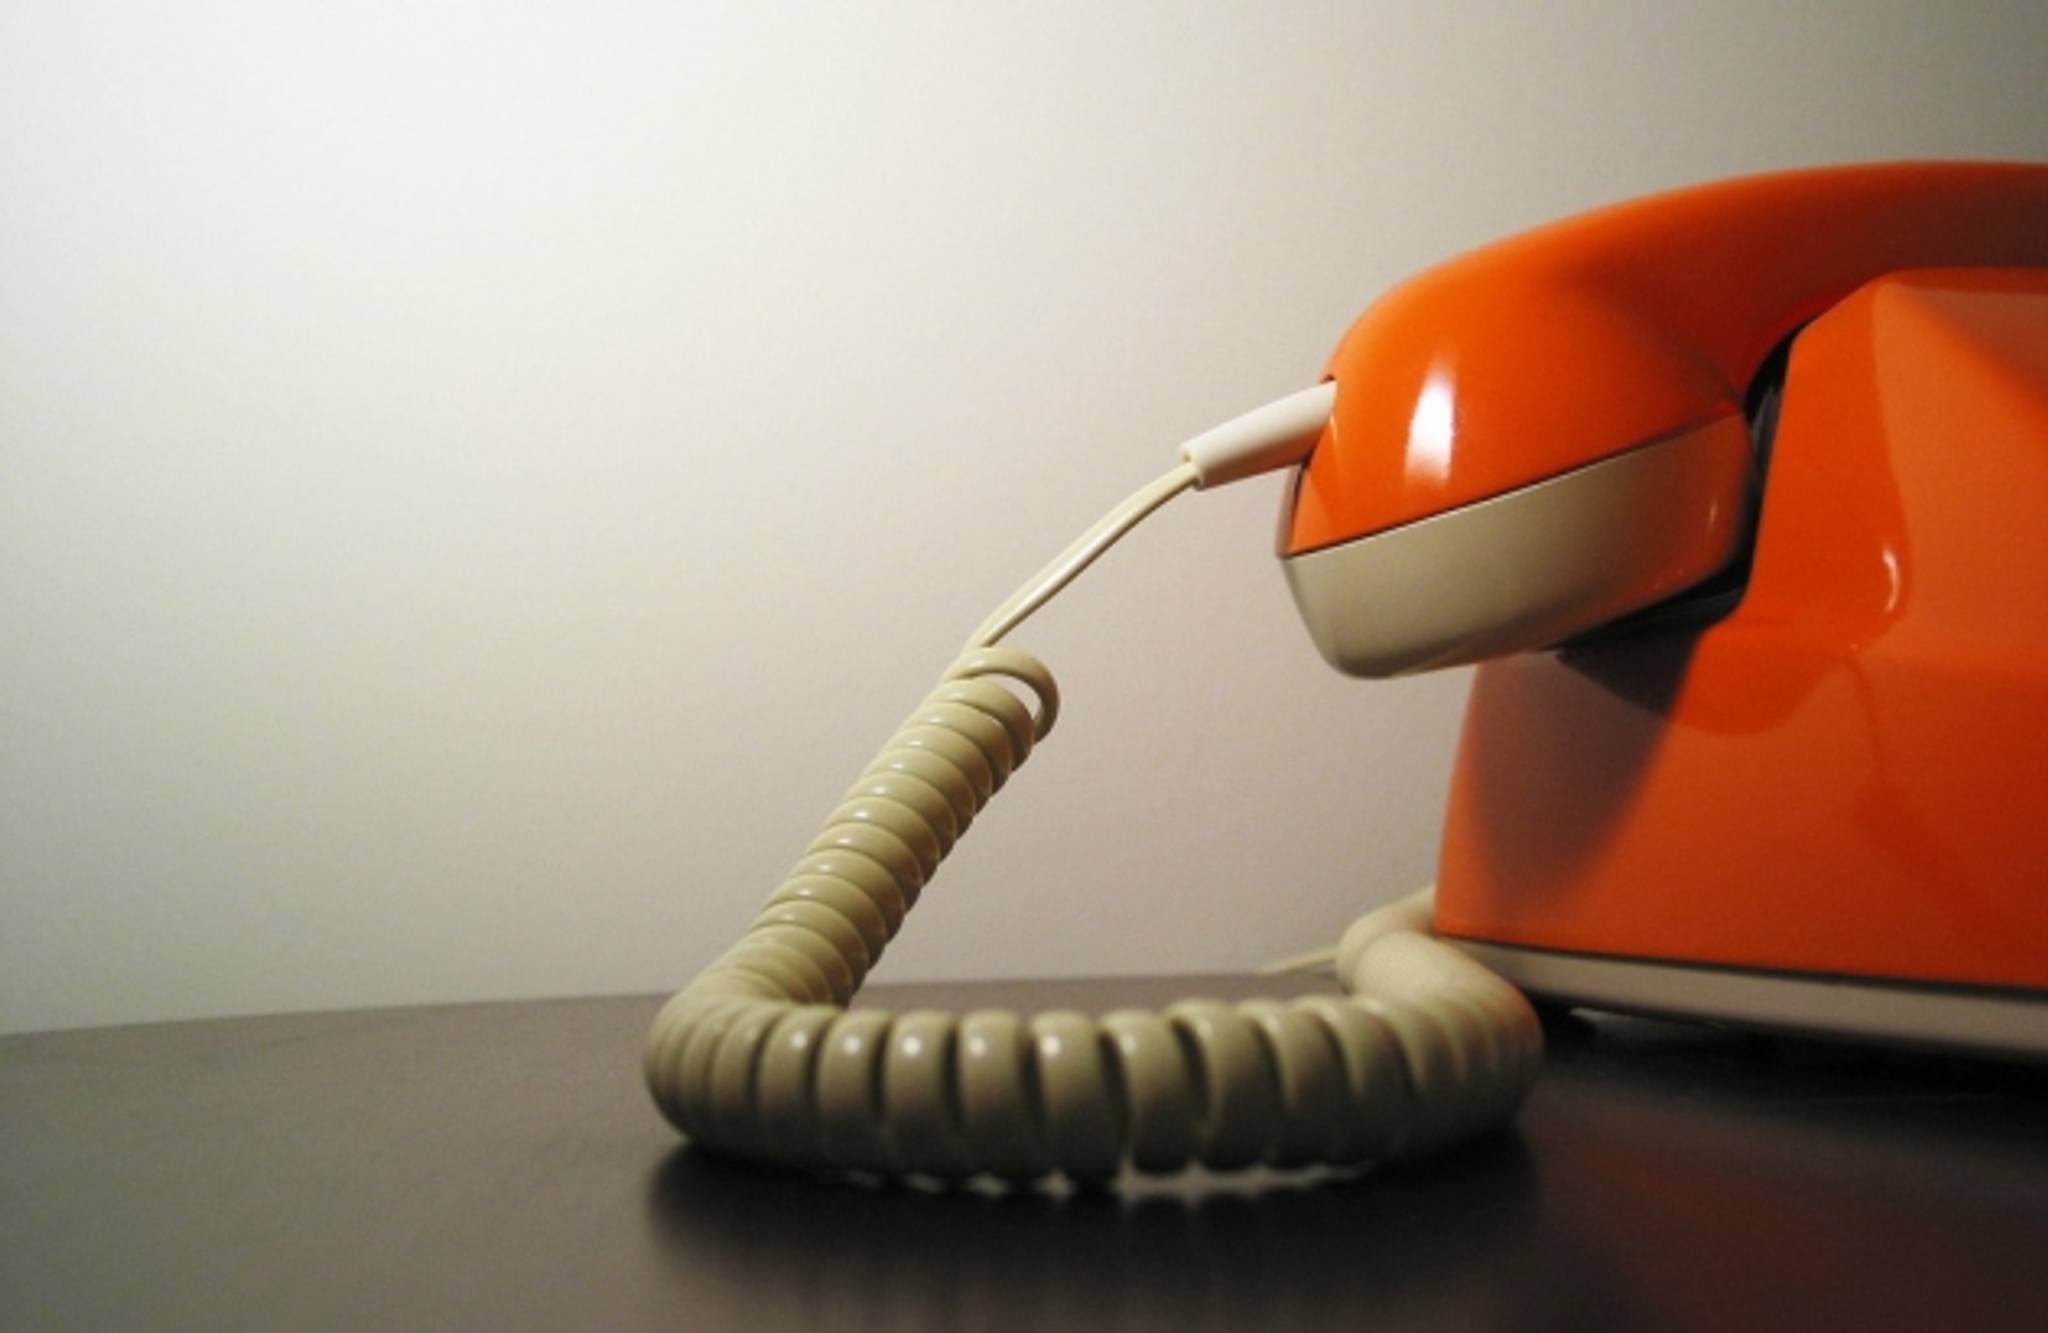 UK landlines: time to cut the cord yet?